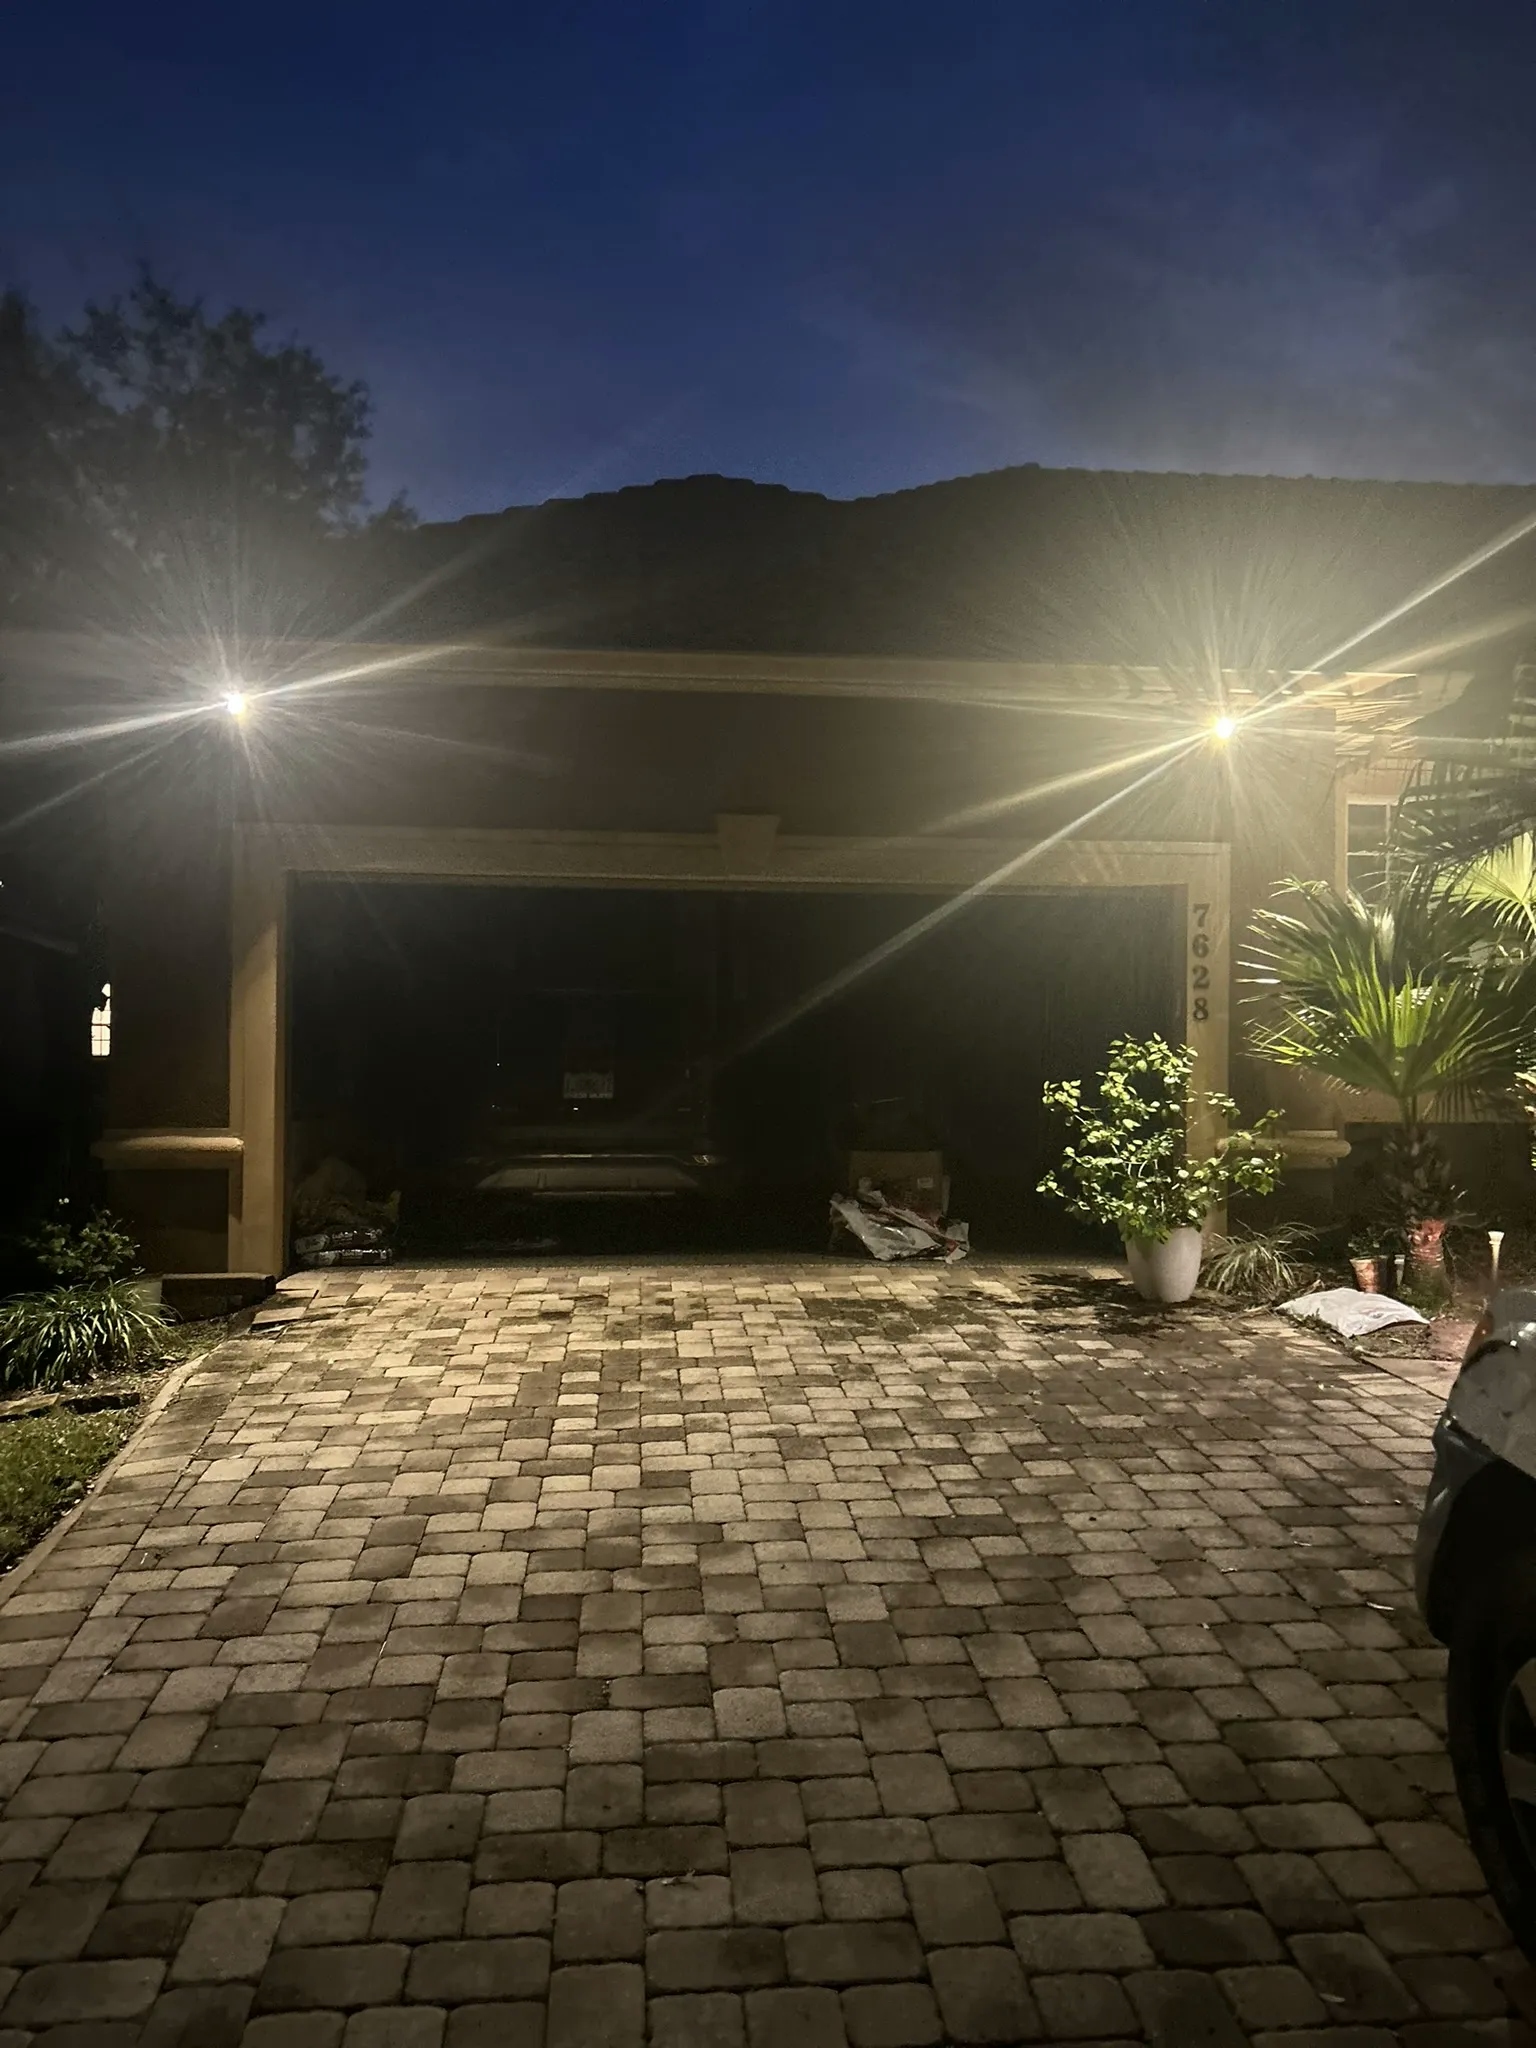 A landscape lighting system illuminates a brick driveway and the exterior of a house at night.